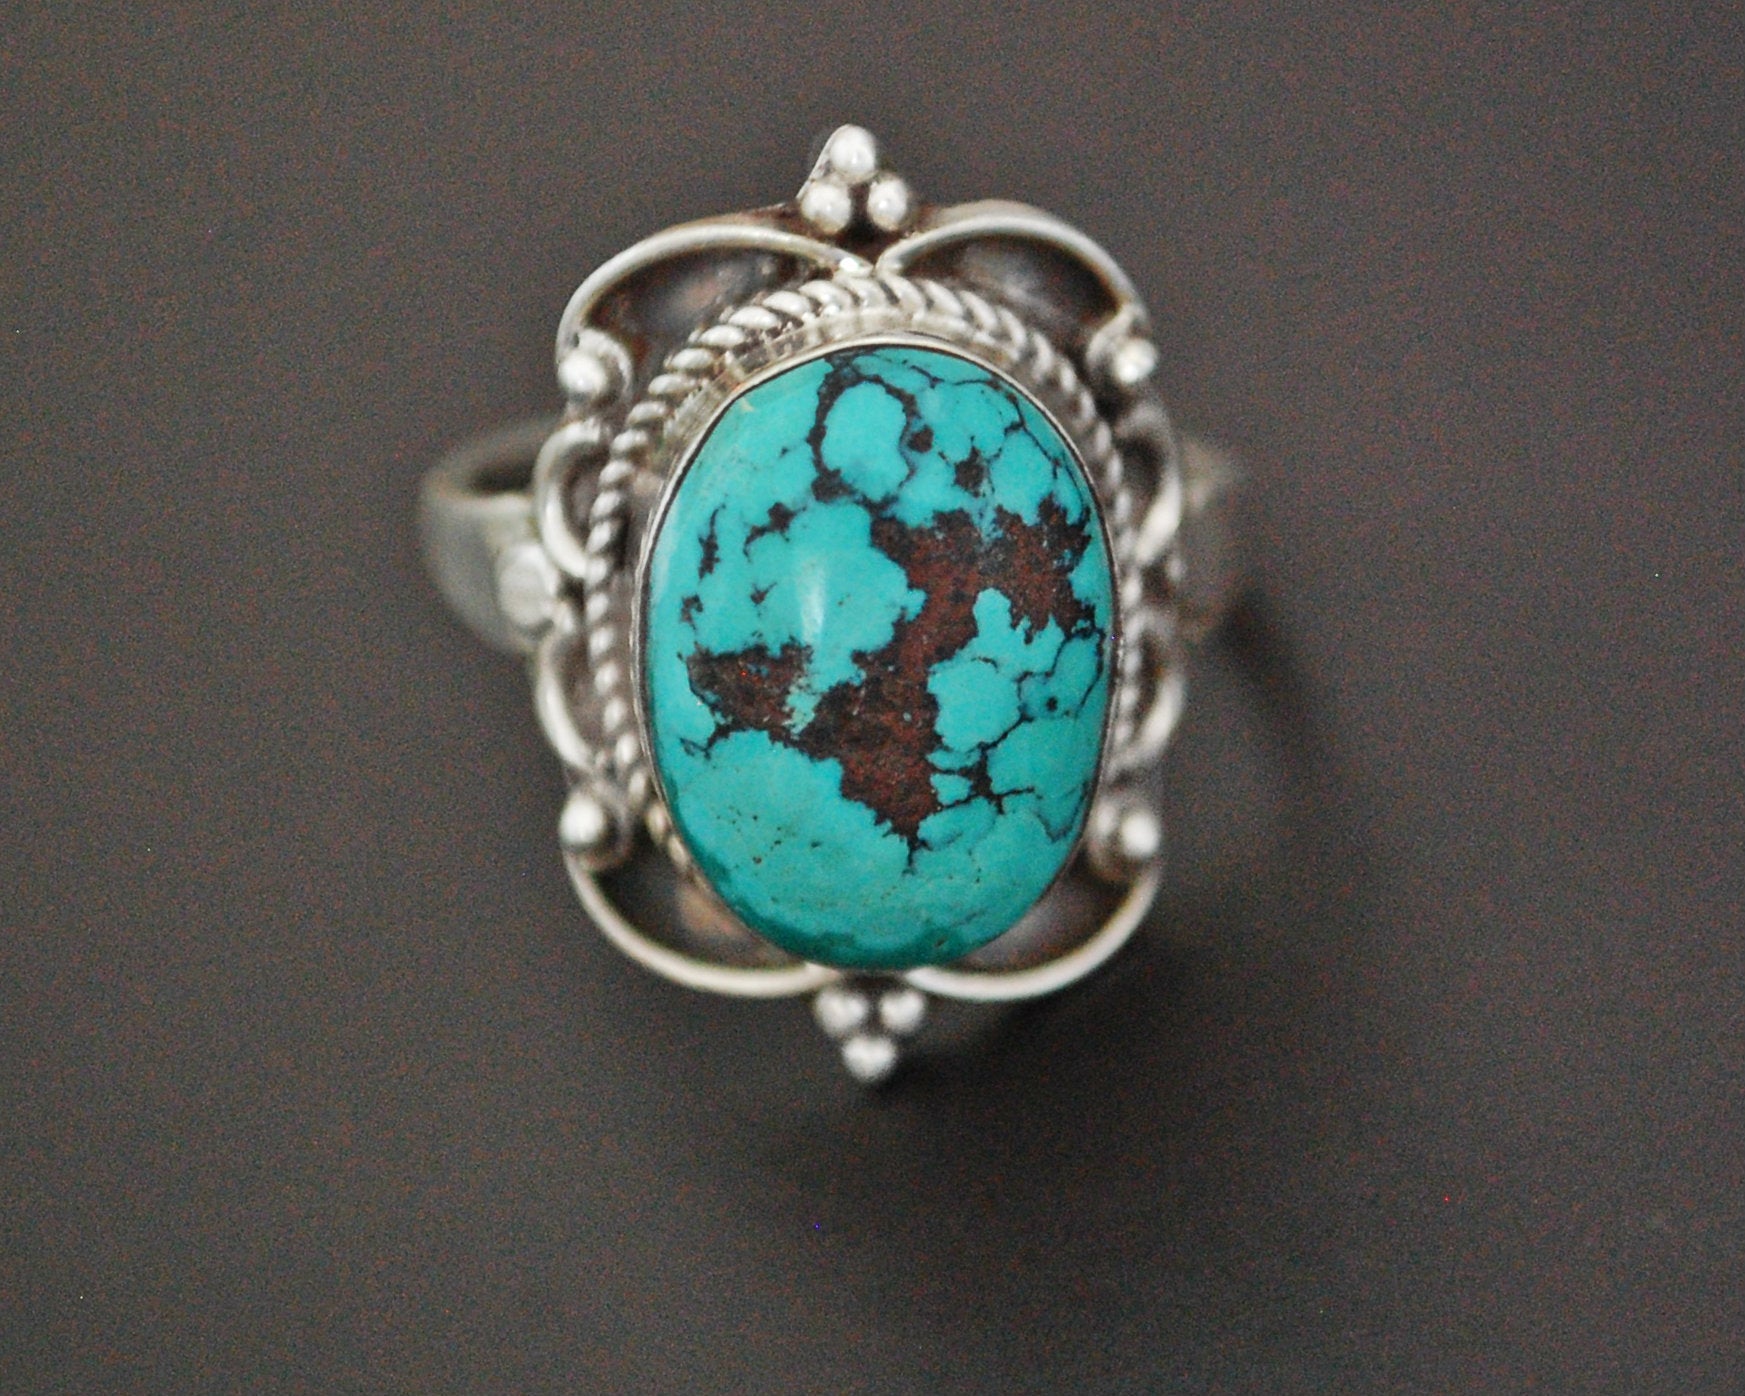 Ethnic Turquoise Ring from India - Size 10.5